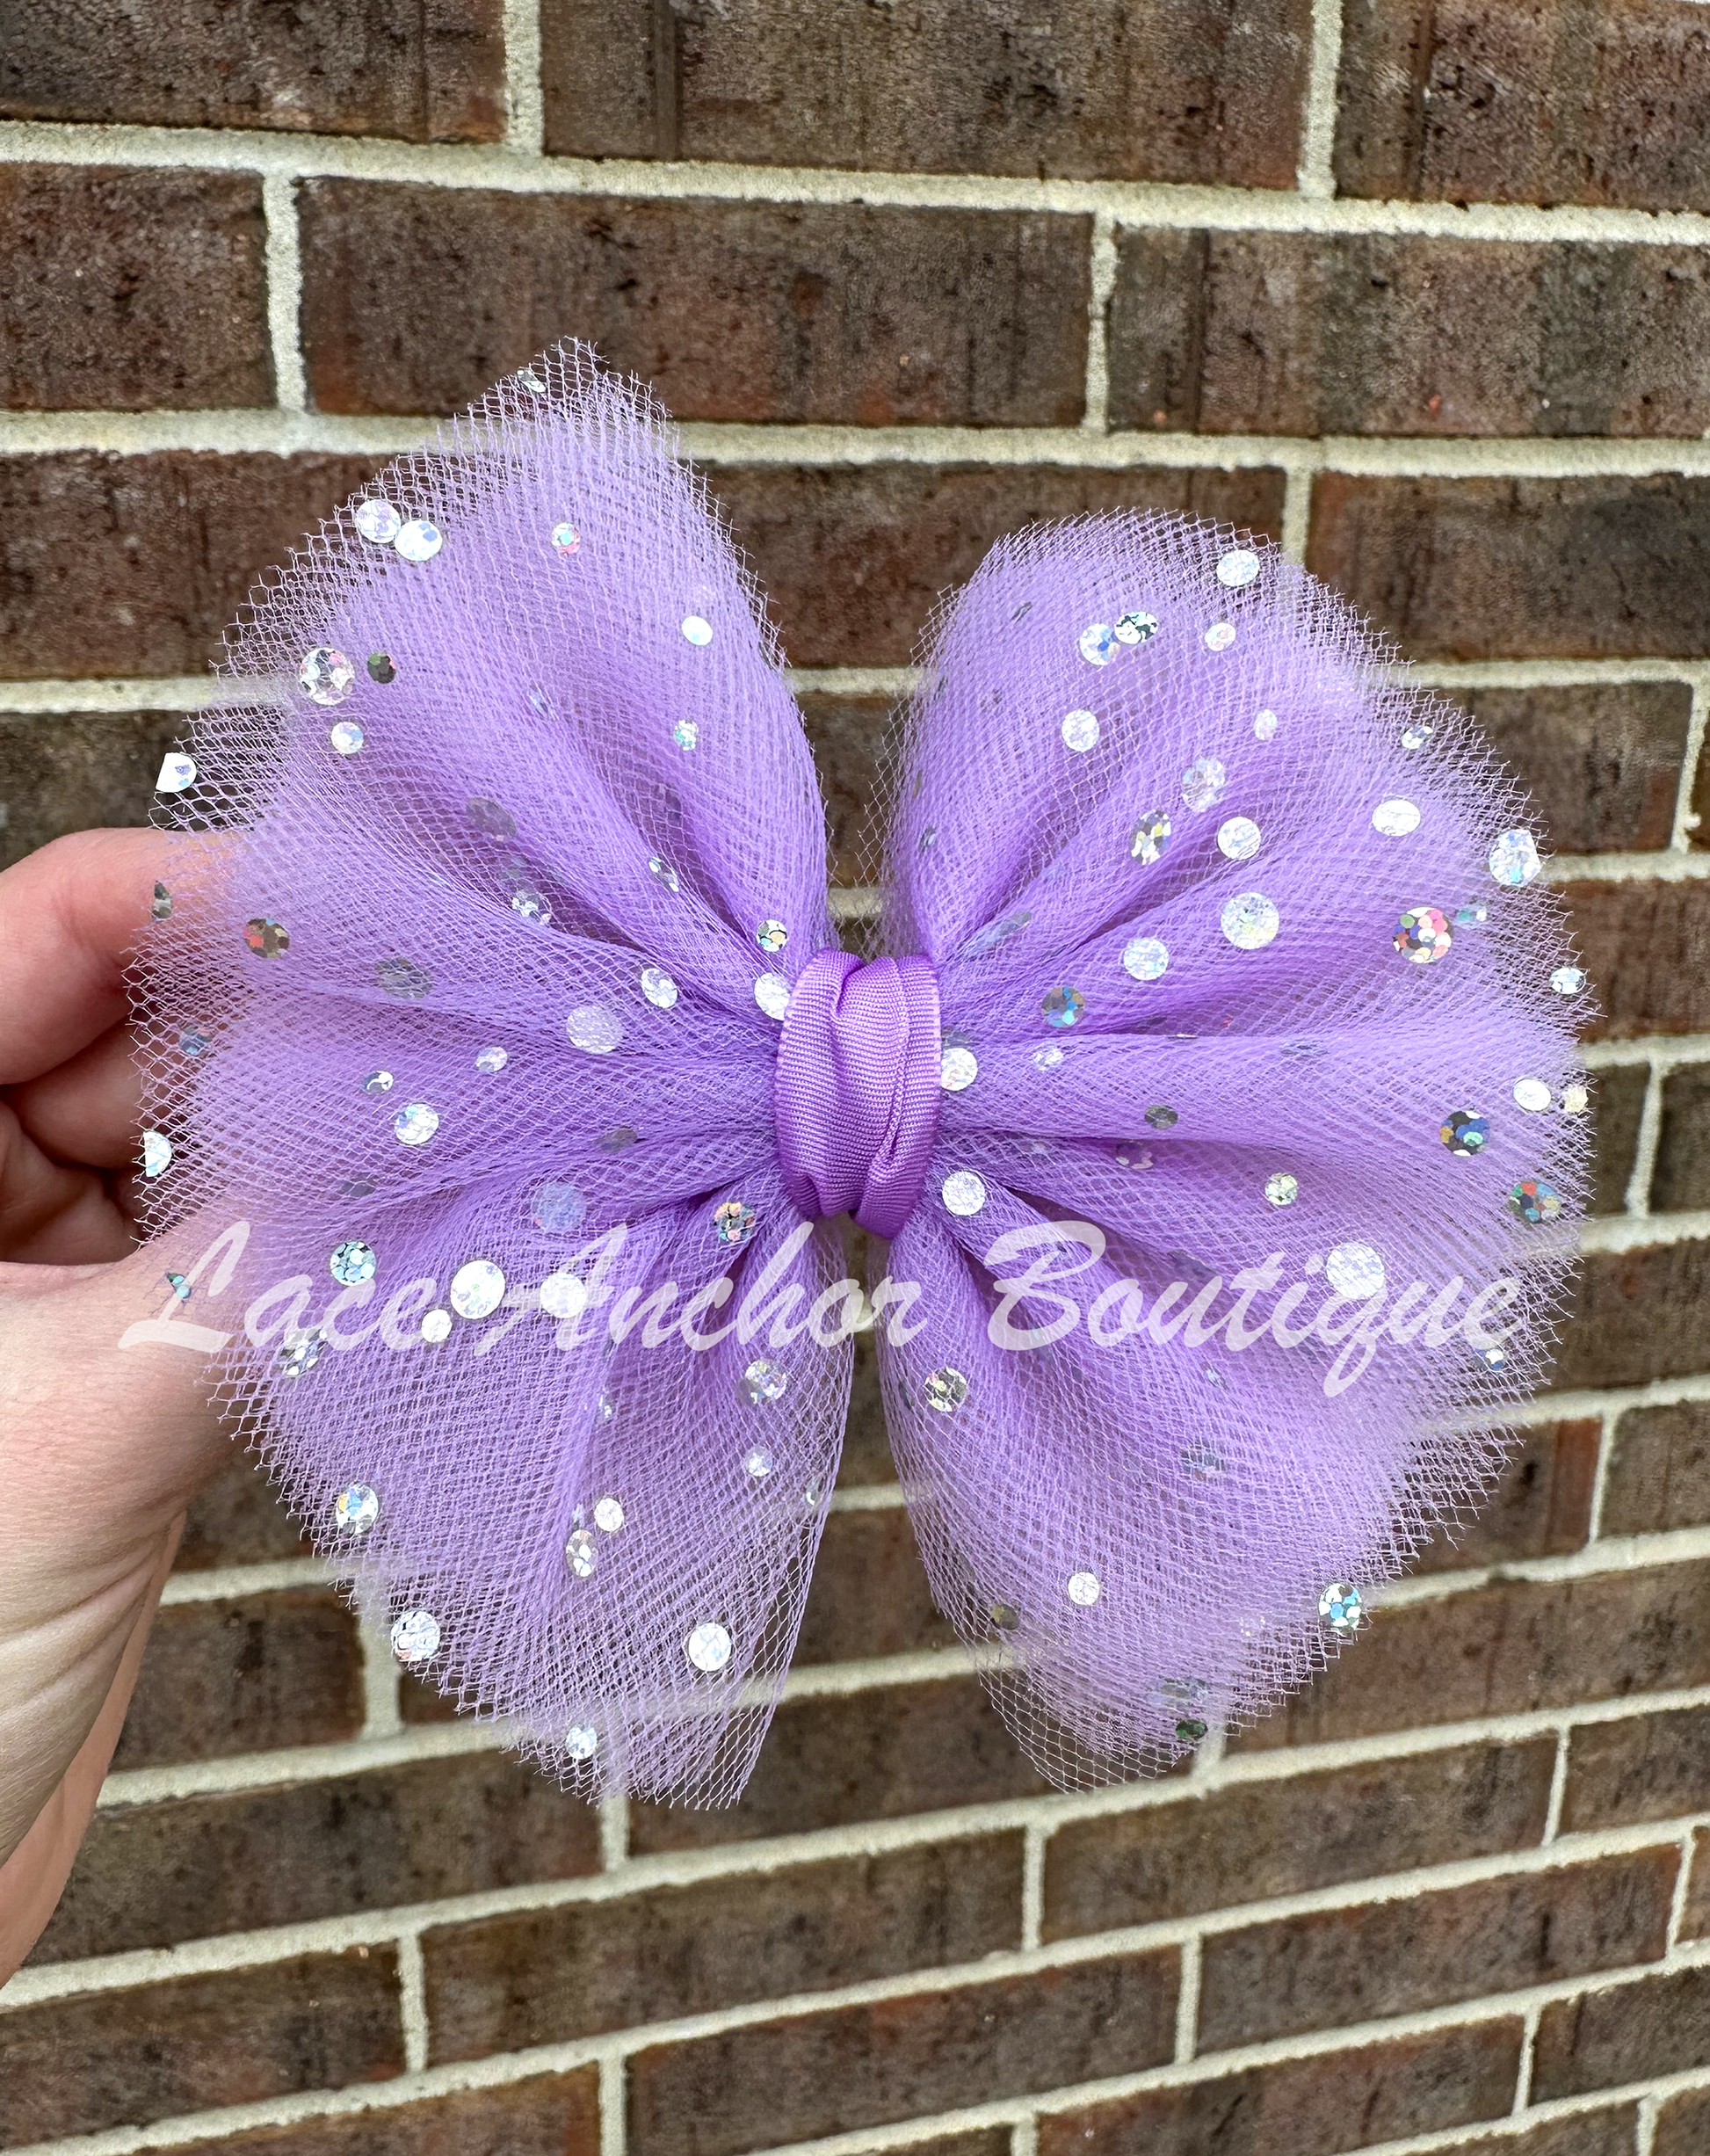 handmade custom tulle girls hair bow clips with silver sequin sparkles and glitter in lilac light purple.